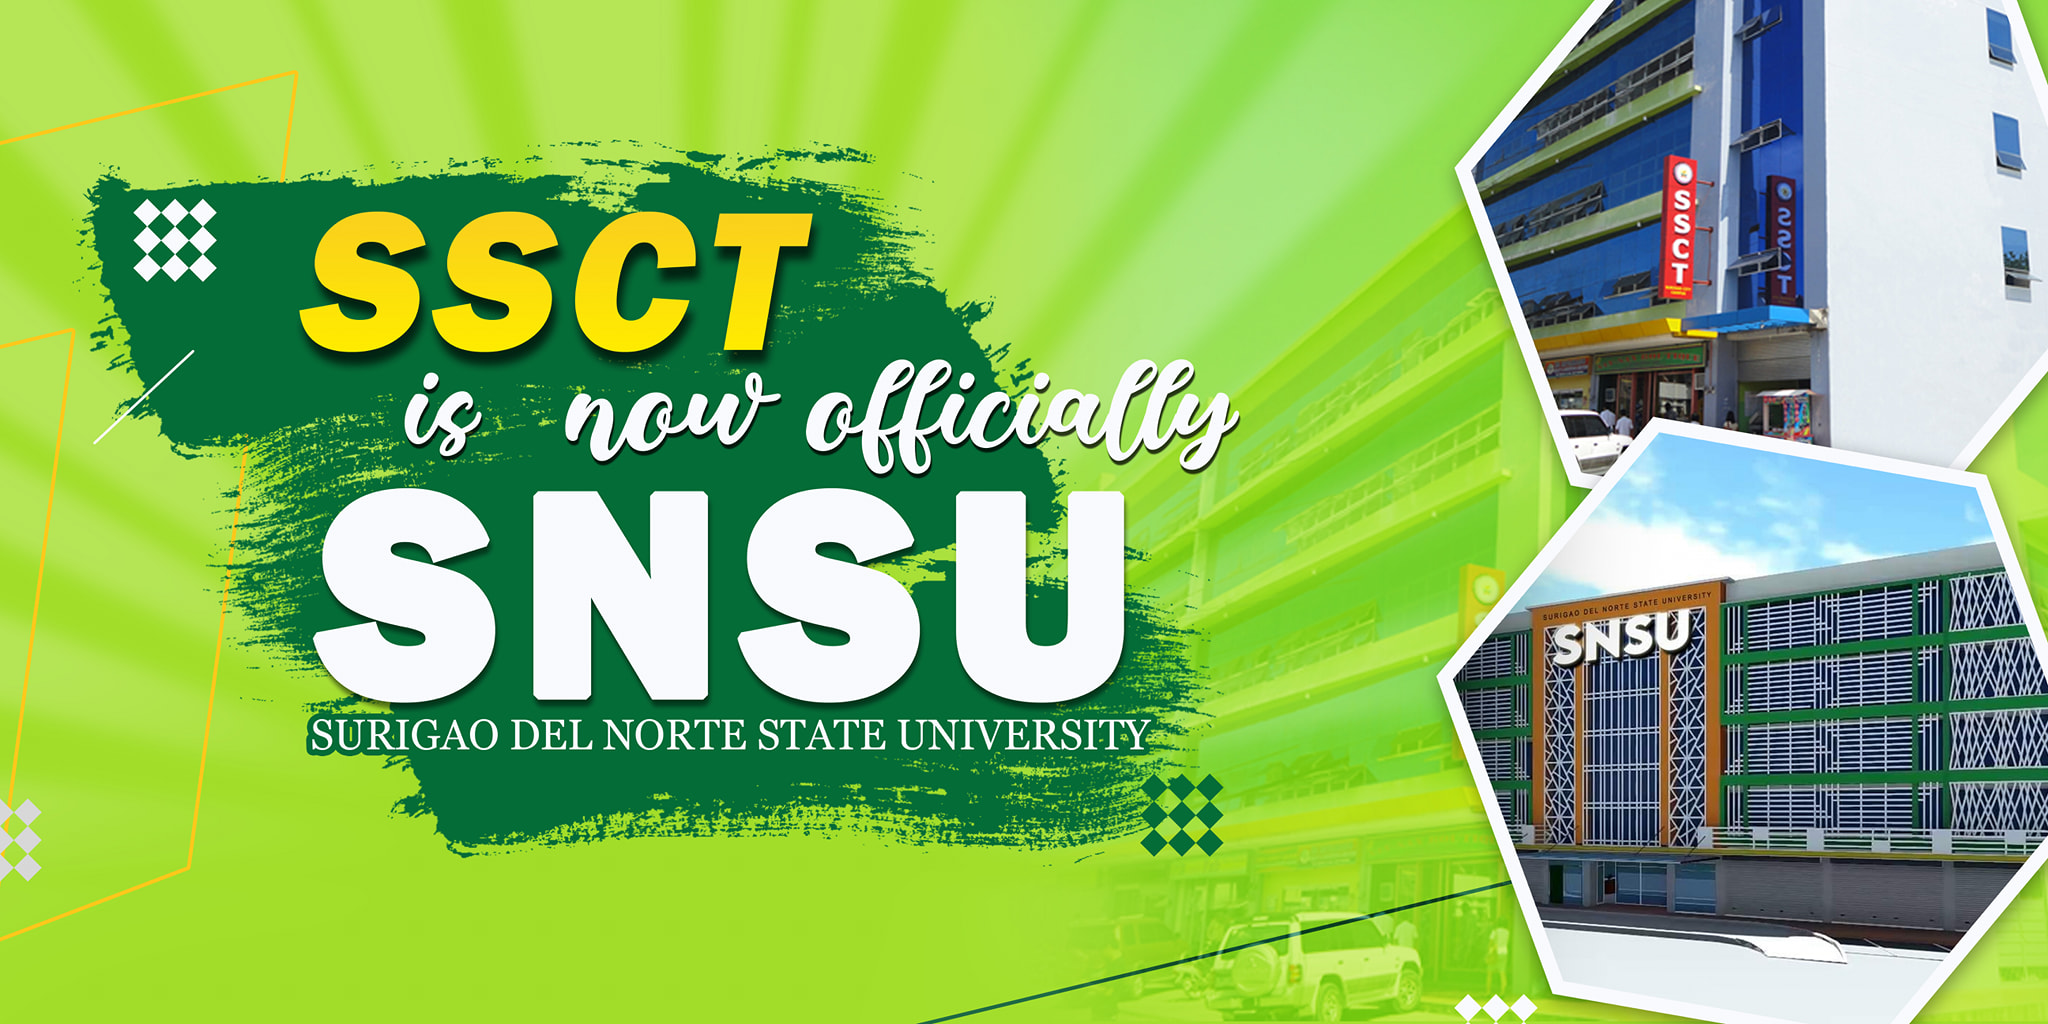 SURIGAO STATE COLLEGE OF TECHNOLOGY OFFICIALLY BECOMES A UNIVERSITY